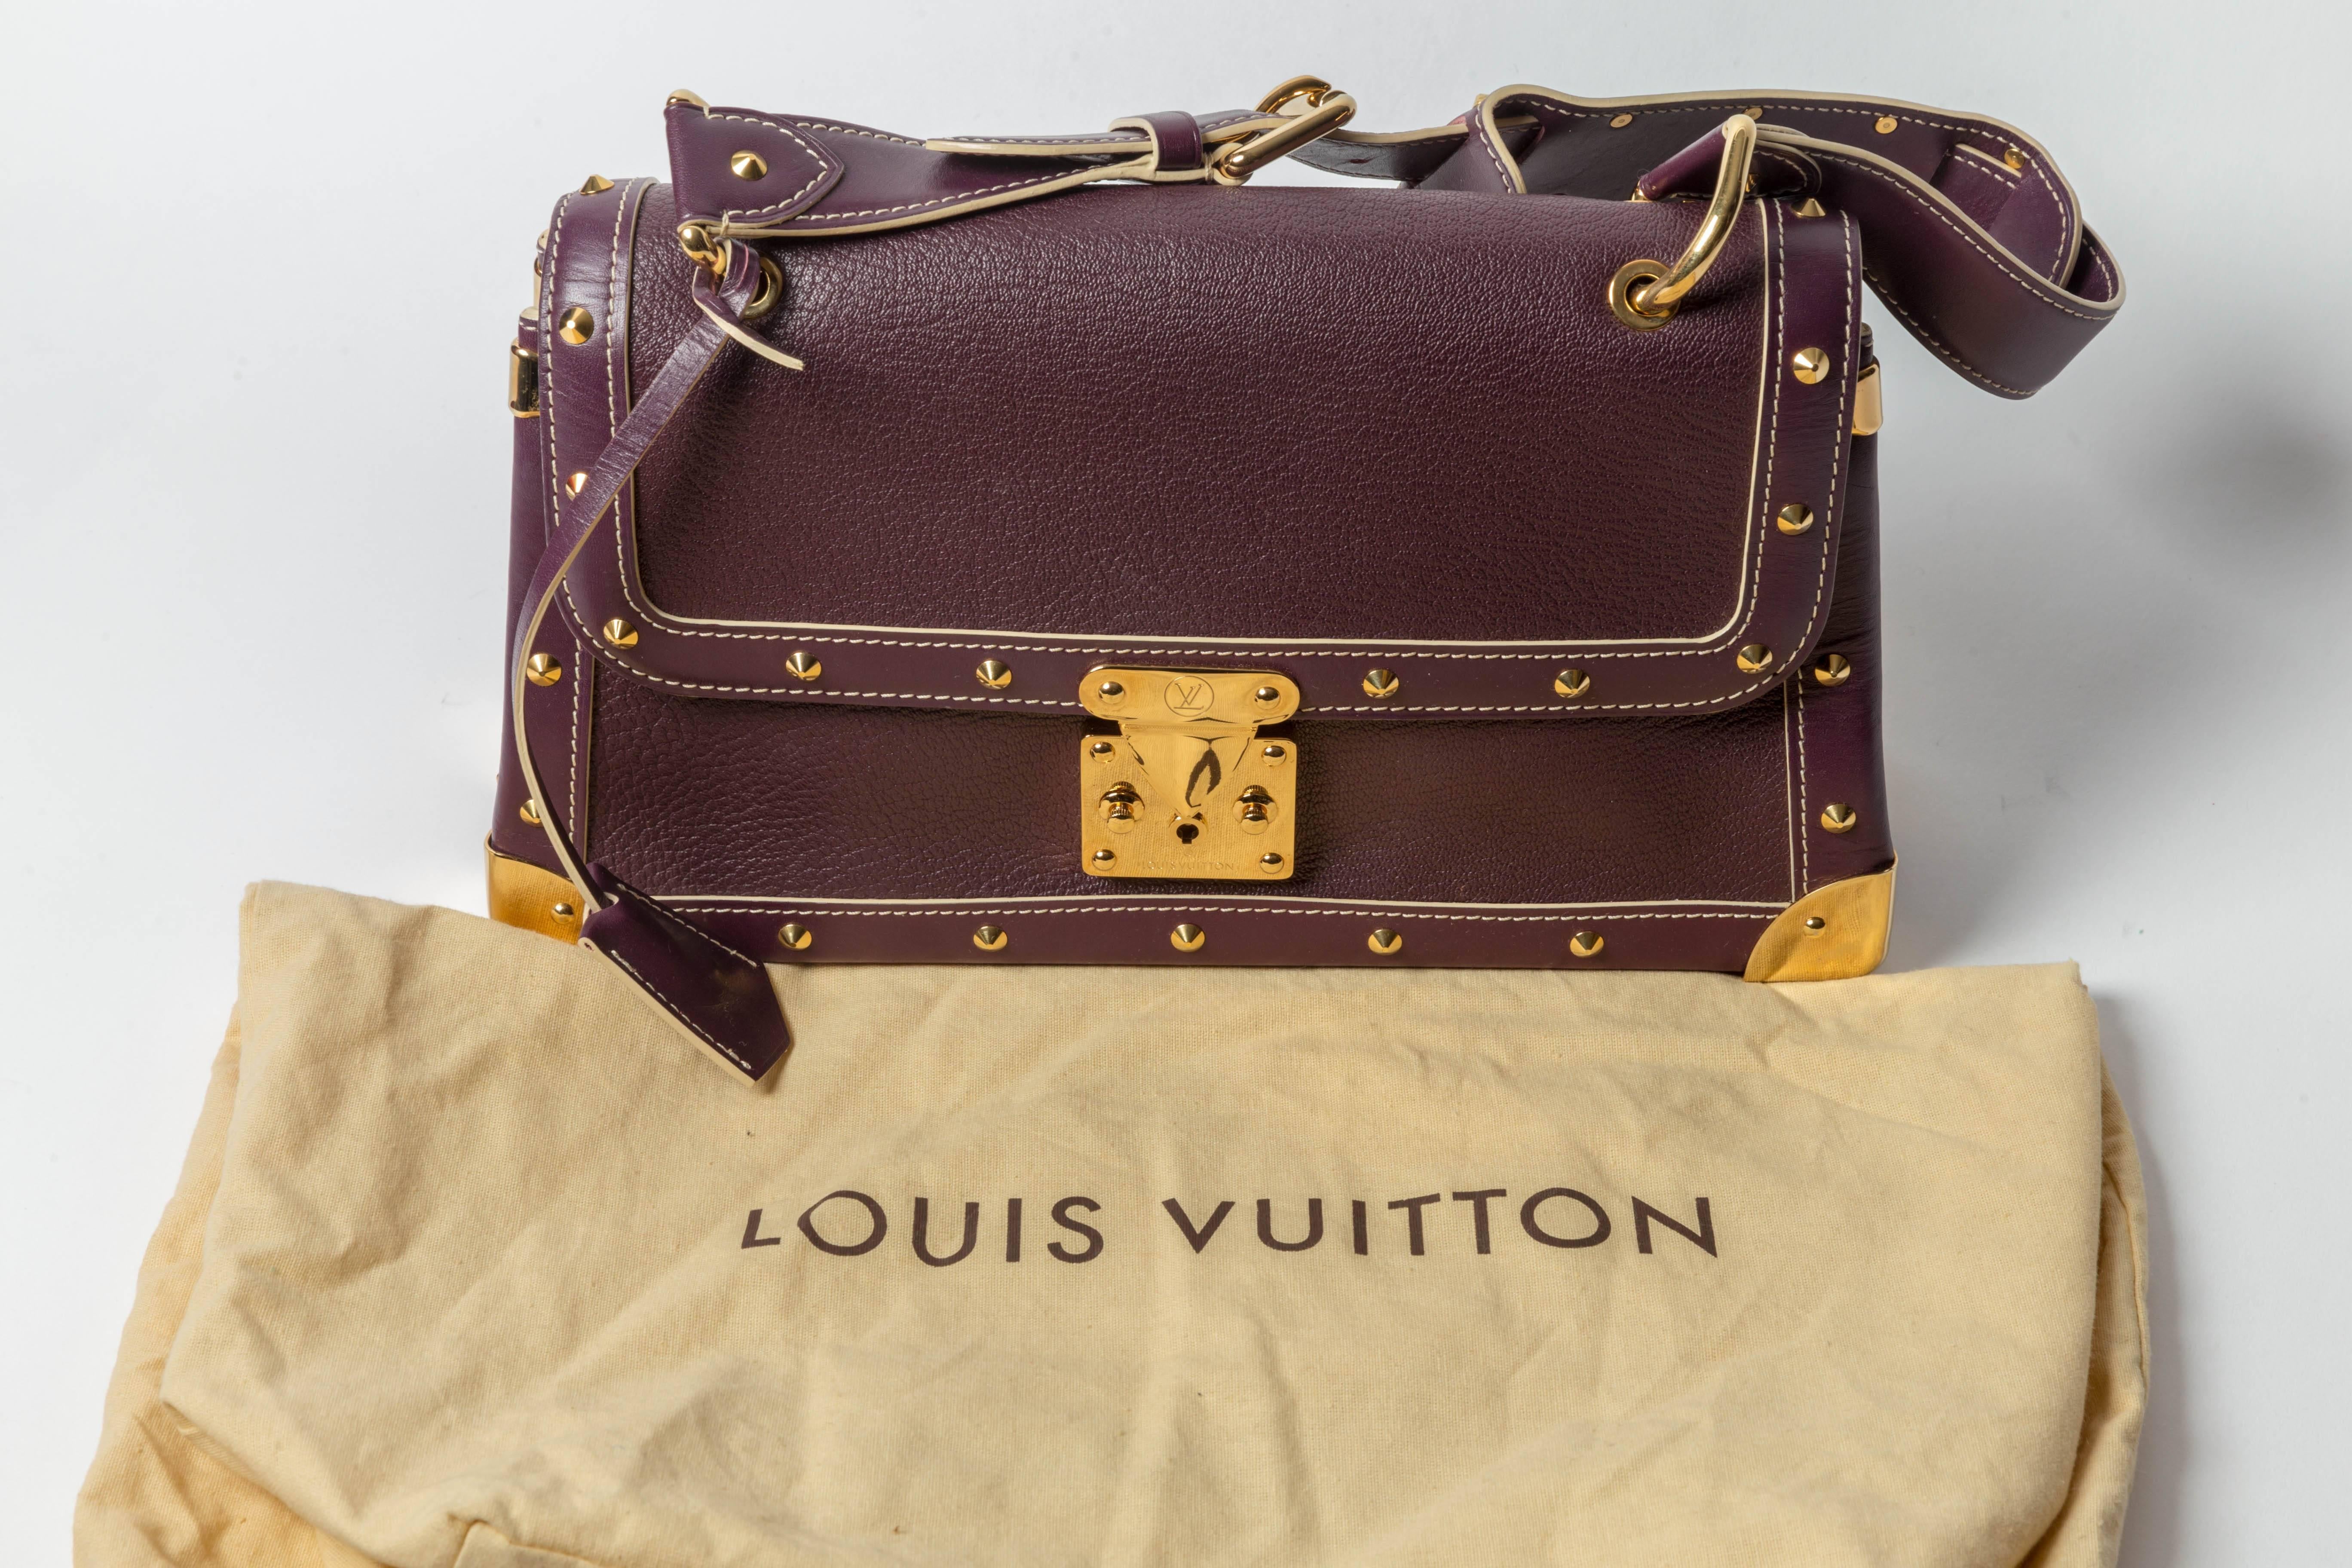 Extraordinary Louis Vuitton Goat Skin Plum Suhali le Talentueux Shoulder Bag in Excellent Condition.
One interior flap pocket.
Gold hardware is also in excellent condition with a few faint scratches.
Dust bag is included.
Shoulder strap drop 8.5